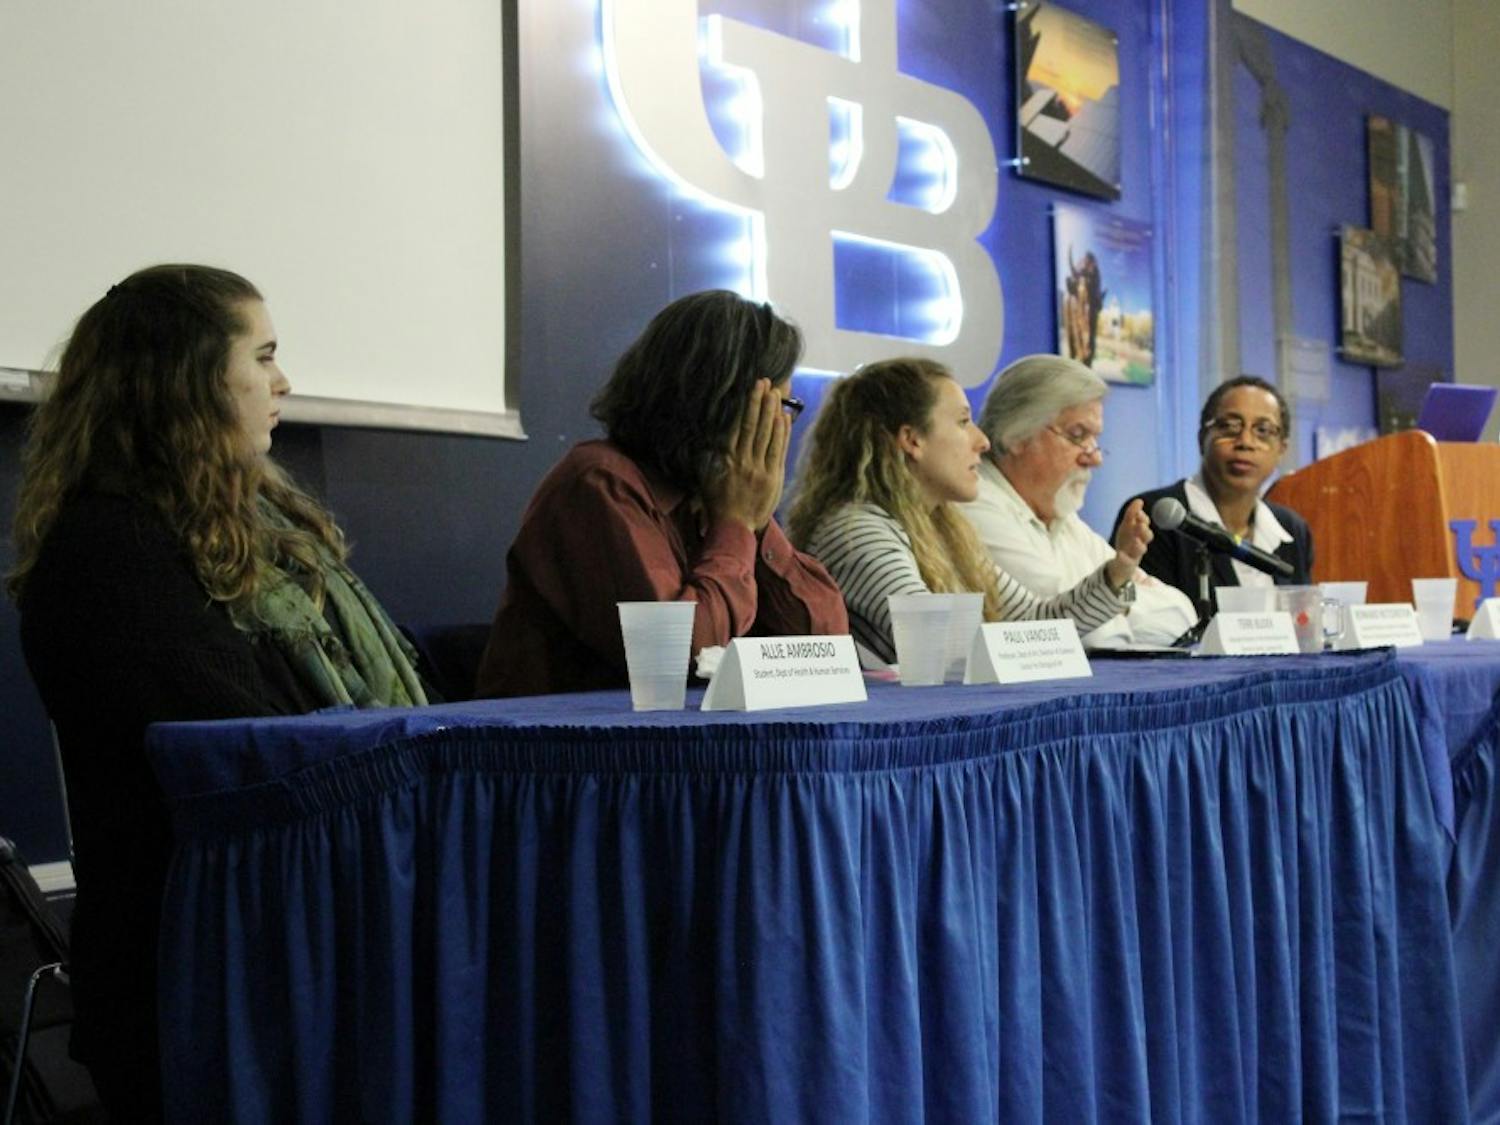 Students, faculty and staff discussed cultural appropriation in the Student Union on Tuesday night.